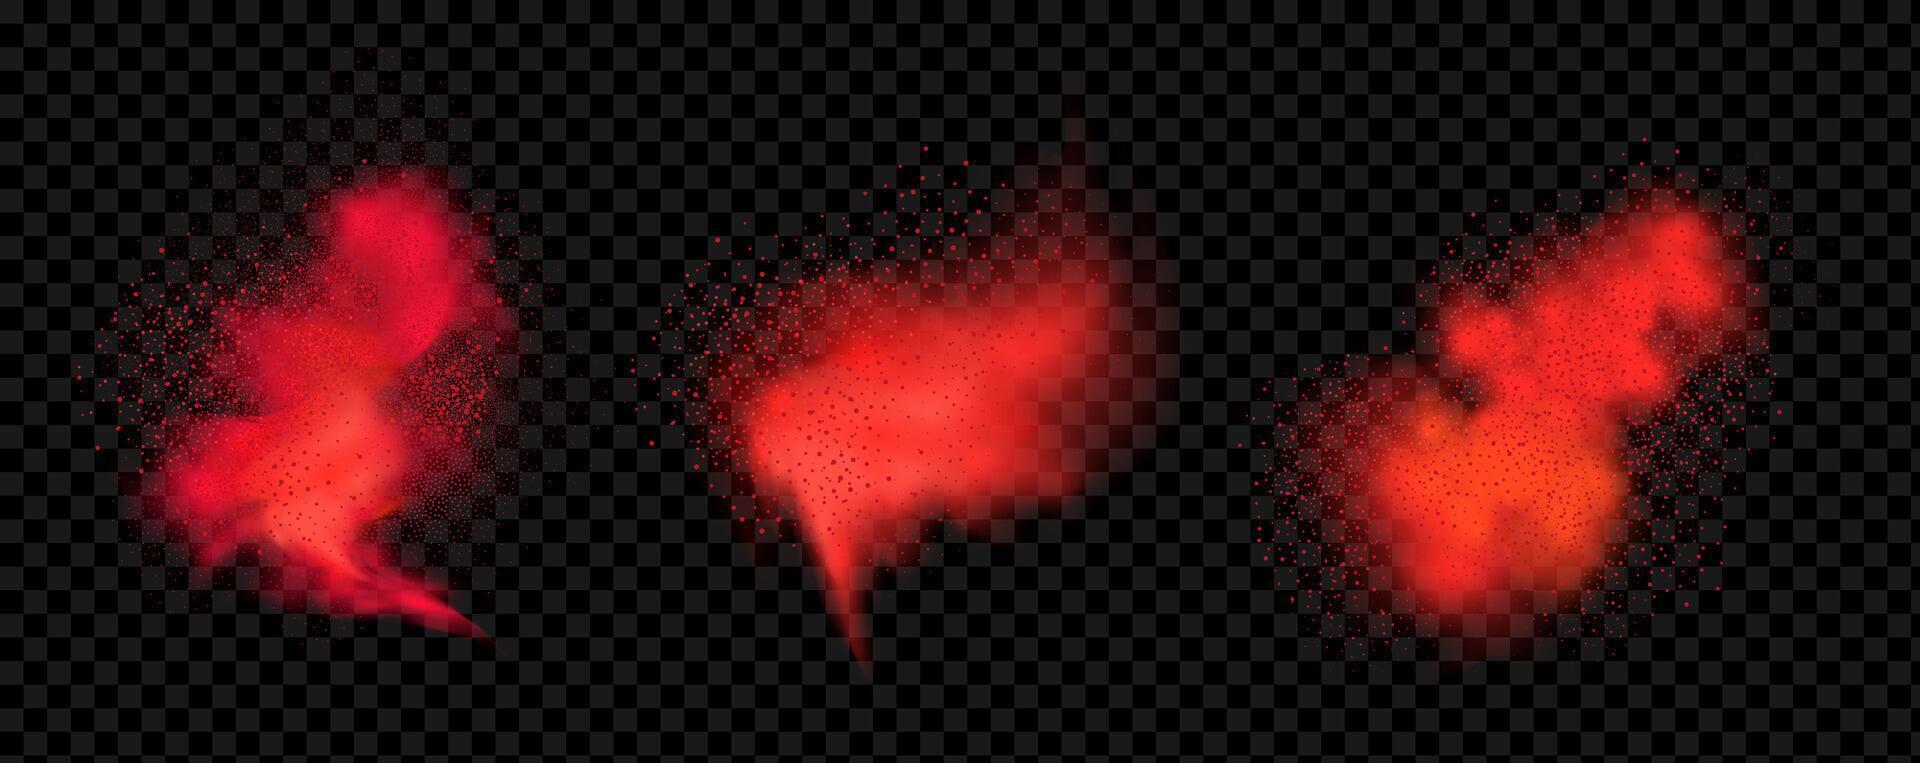 Explosion of red chili pepper, spices and paprika. vector